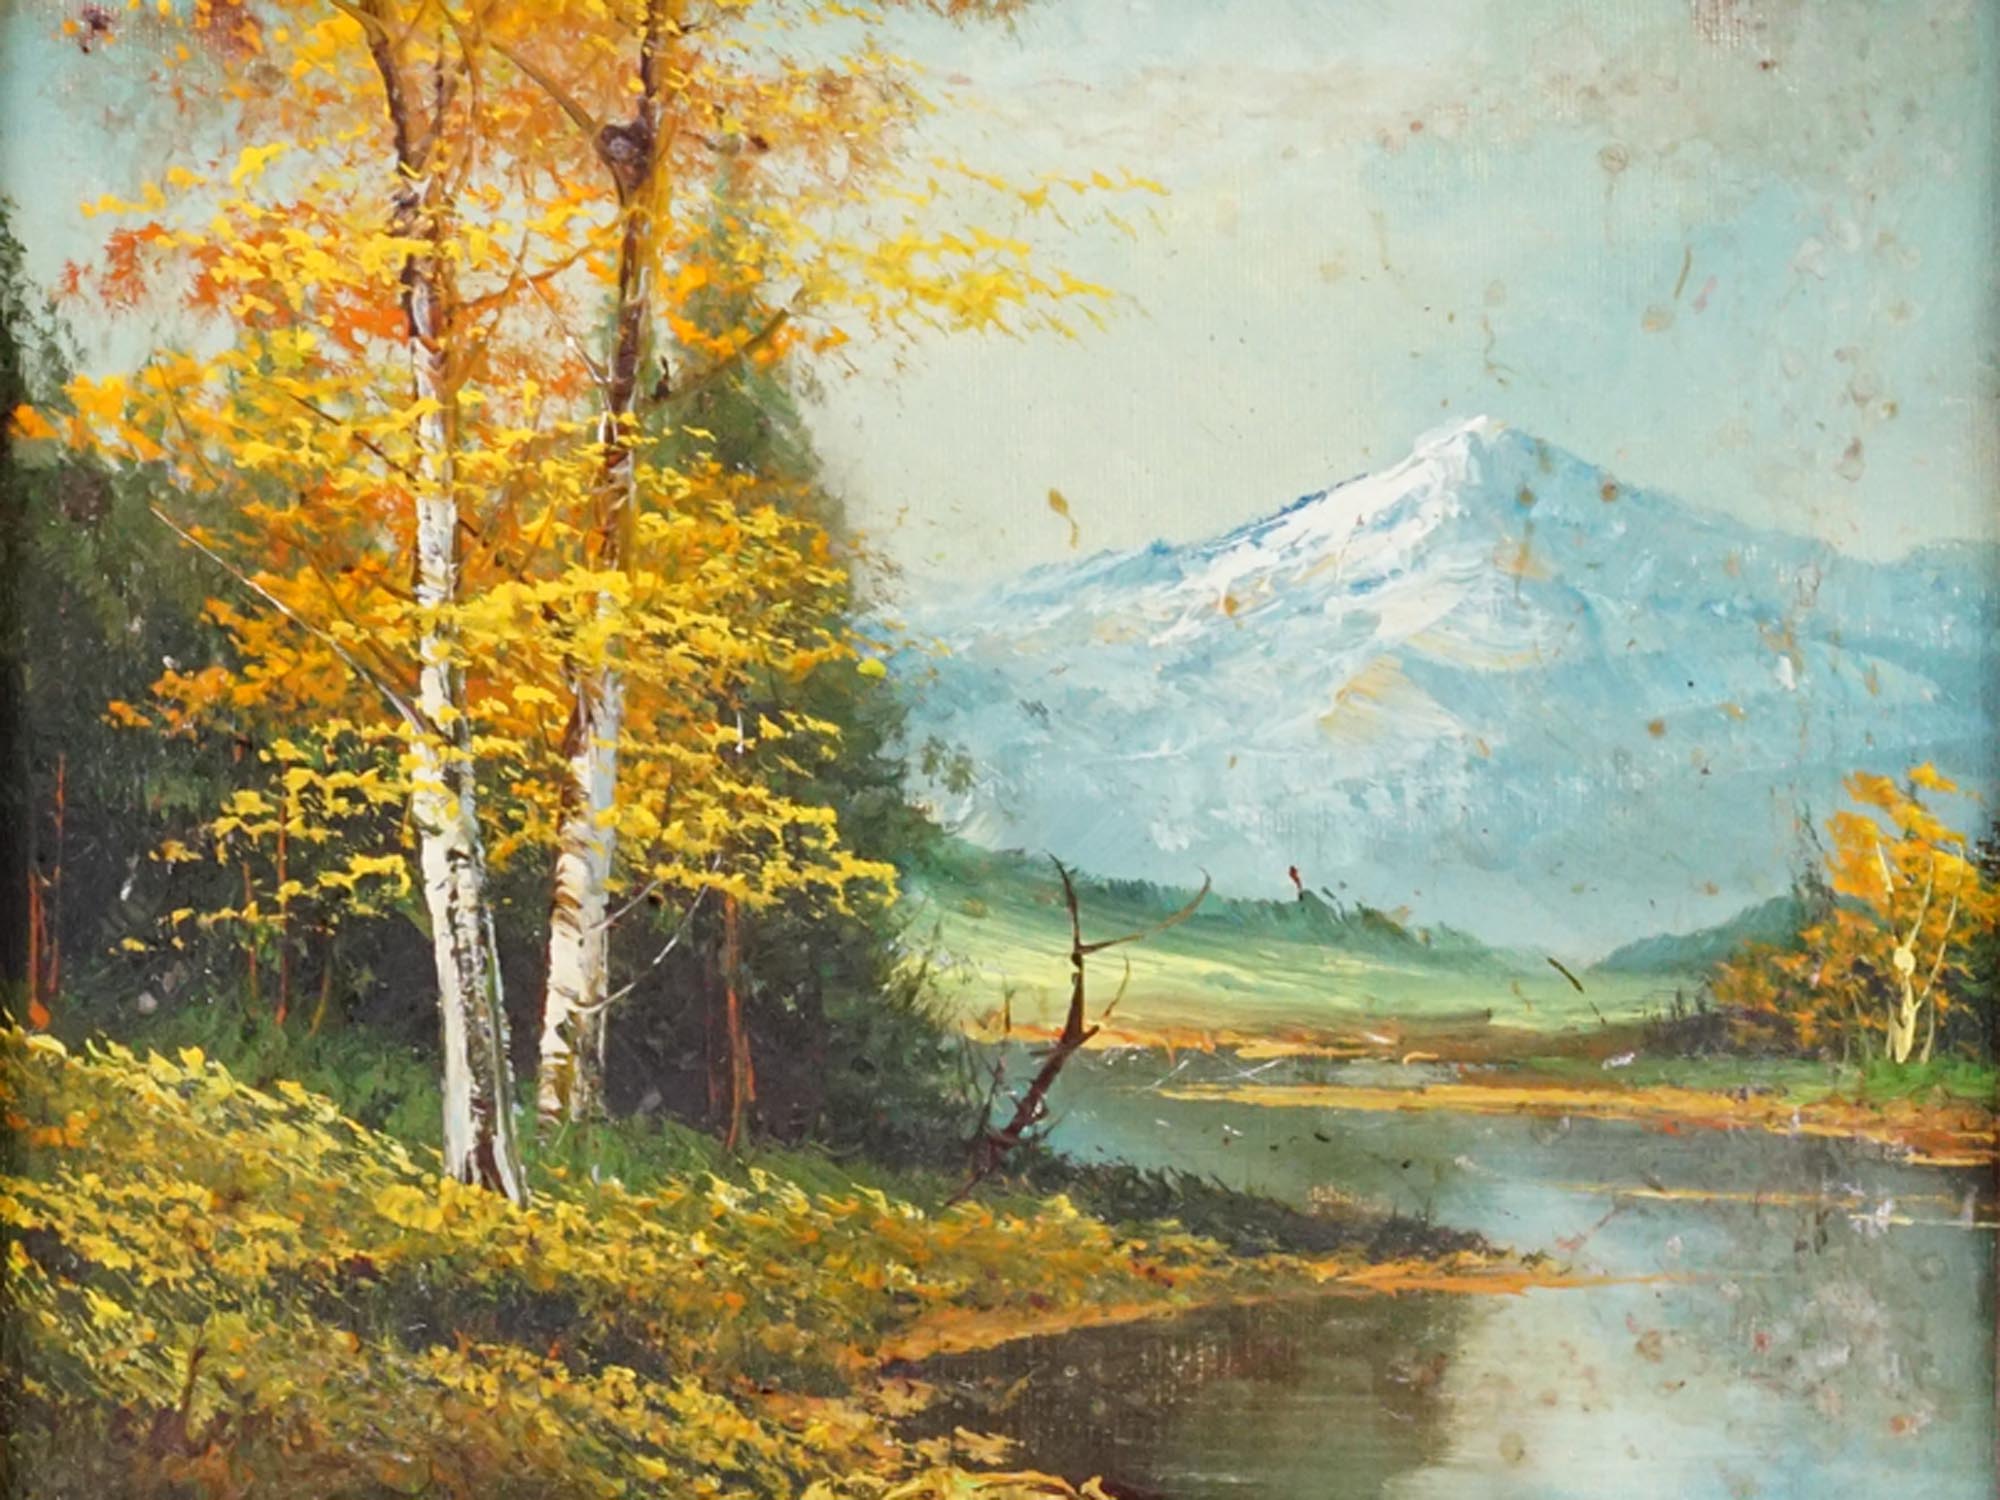 MOUNTAIN LANDSCAPE OIL PAINTING BY ALICE MEDINA PIC-1